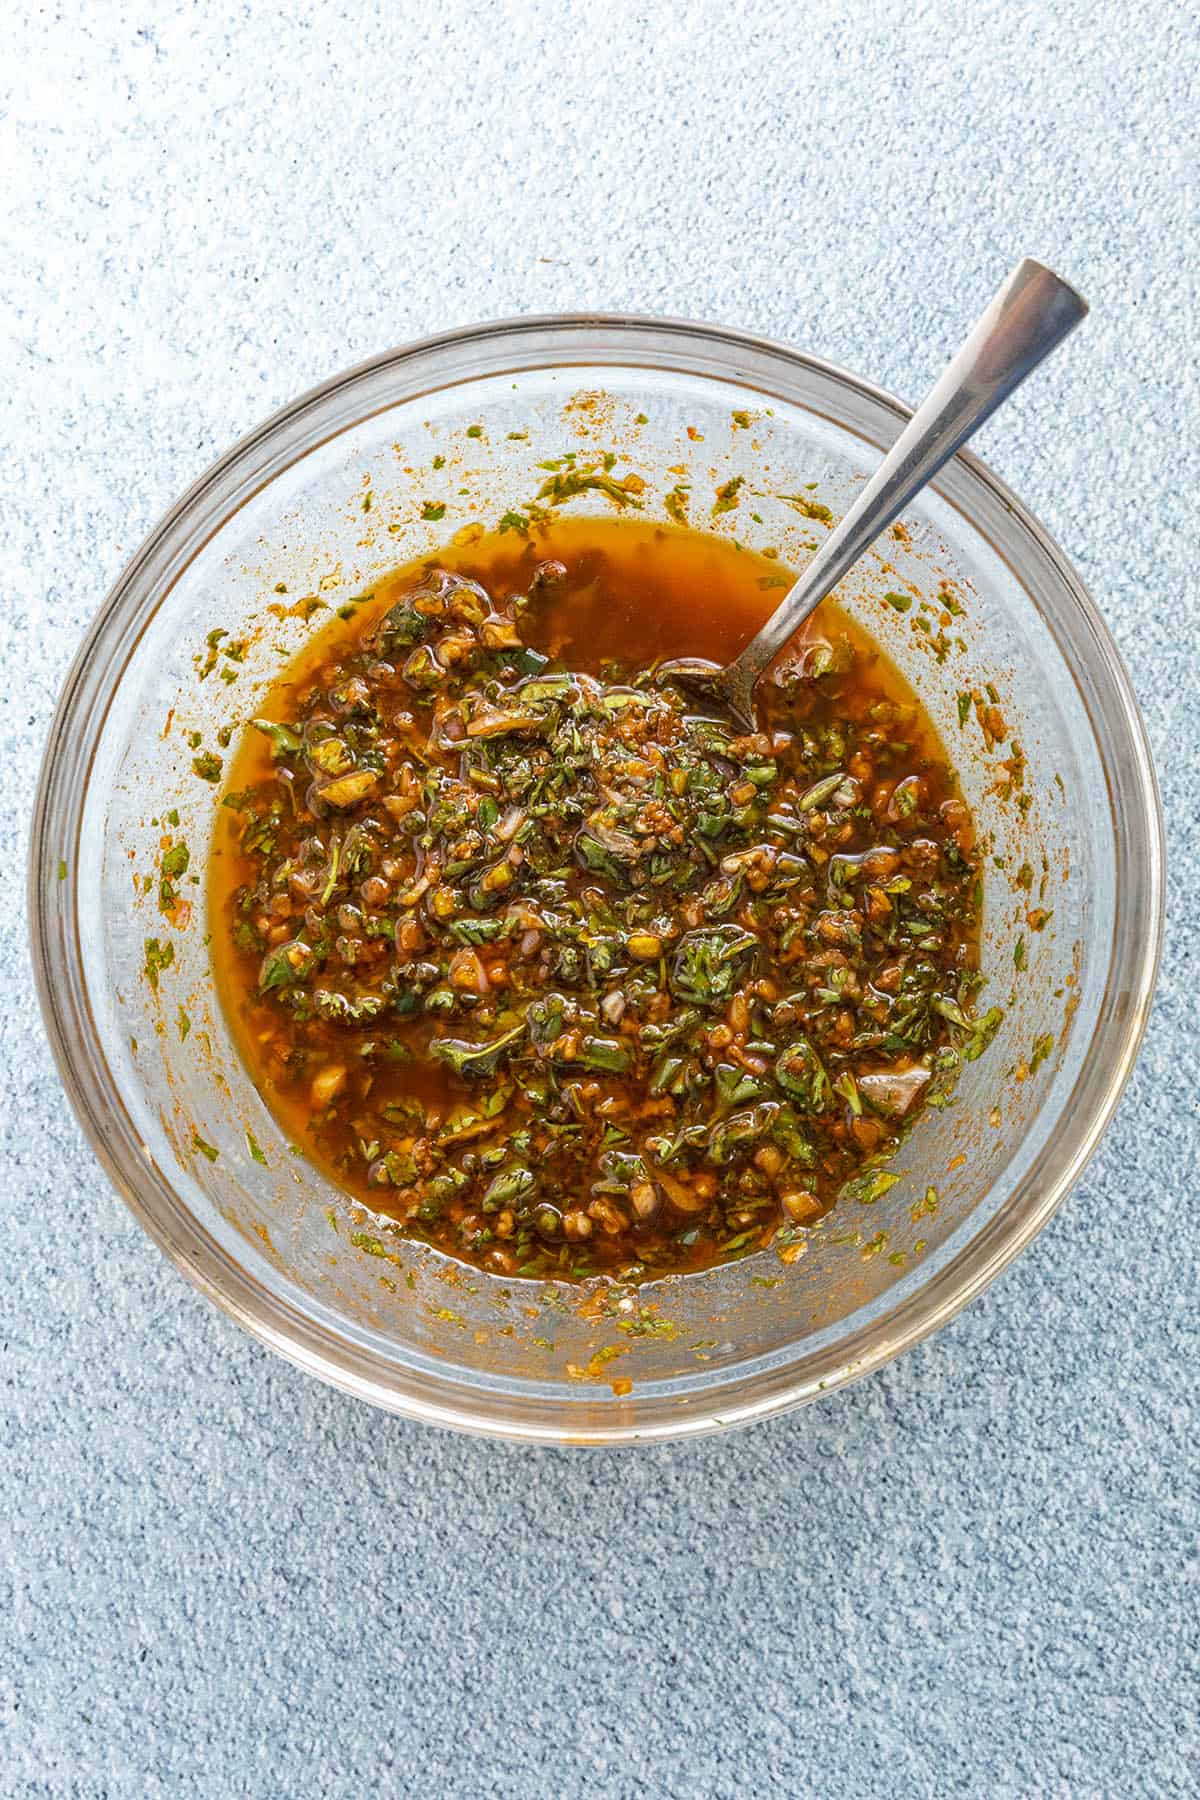 Chermoula sauce mixed in a bowl